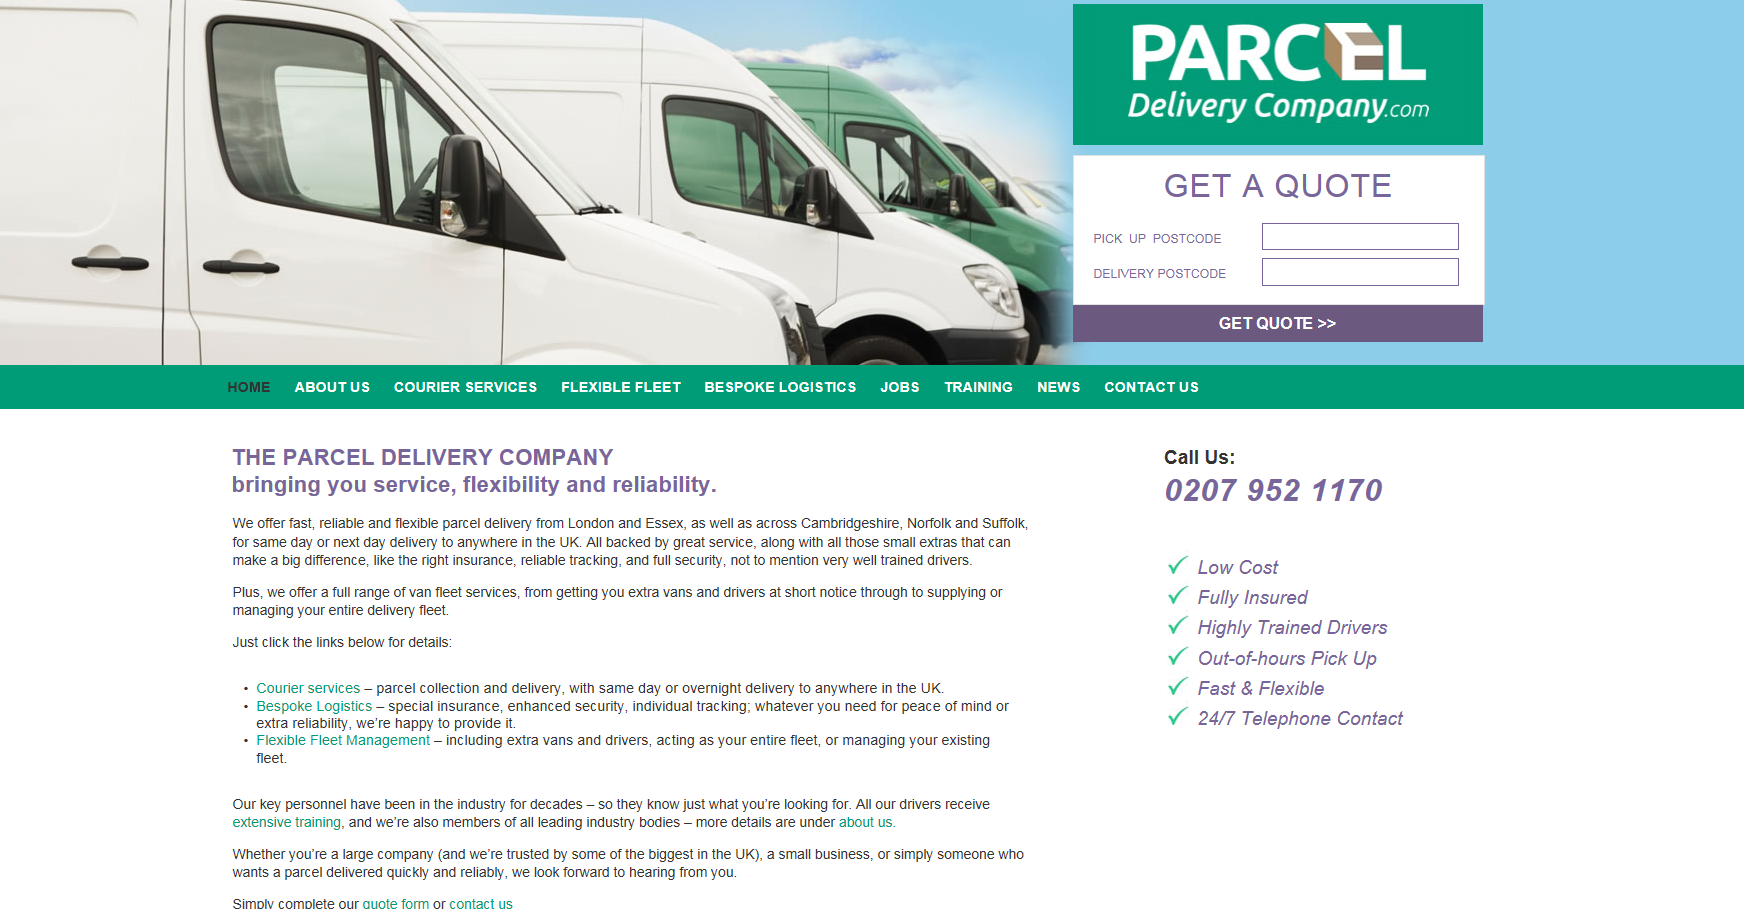 <b>Parcel Delivery Company</b> complete copy, optimised for search engines